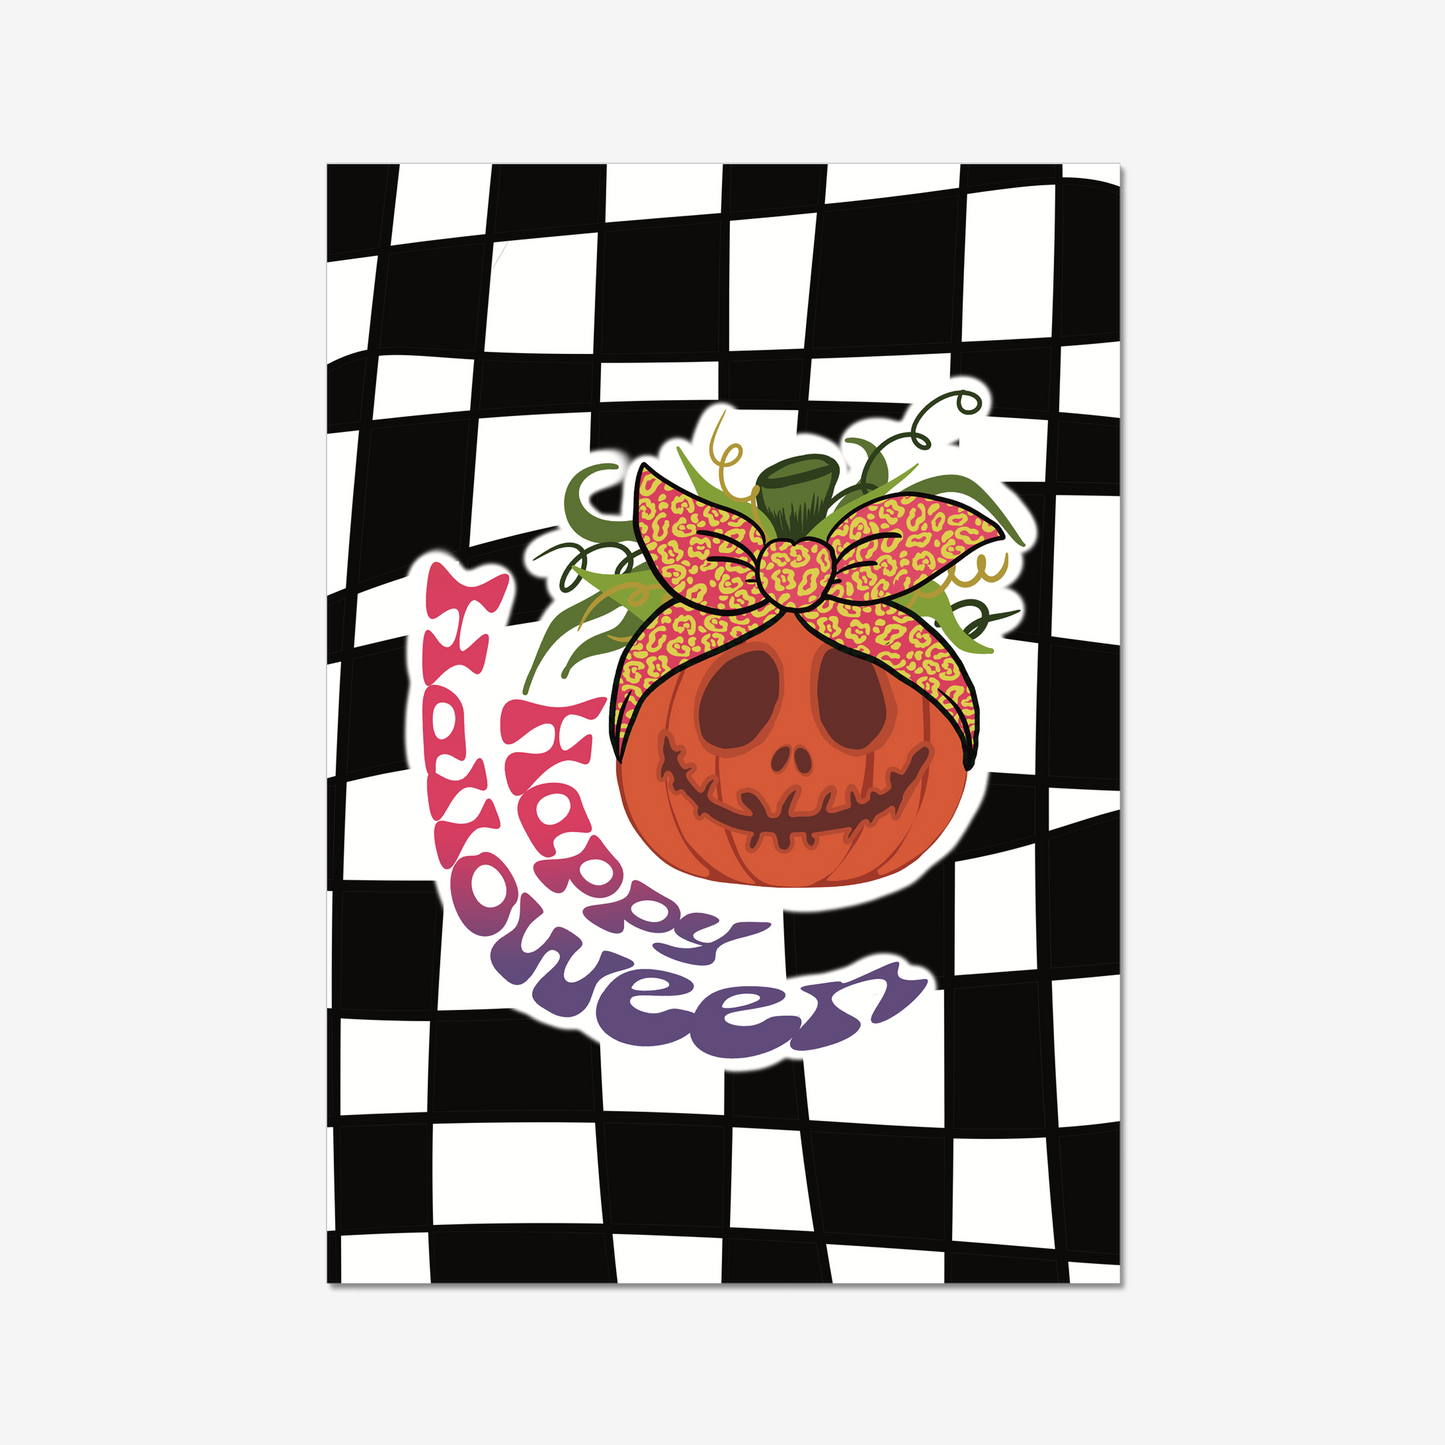 Introducing our Checkerboard Halloween Pumpkin Art Print! Plus, it has a distinctly Beetlejuice vibe that we just love. So if you're looking for a fun and unique way to celebrate Halloween this year, our Checkerboard Halloween Pumpkin Art Print is the perfect choice! Free Shipping on orders over £50.